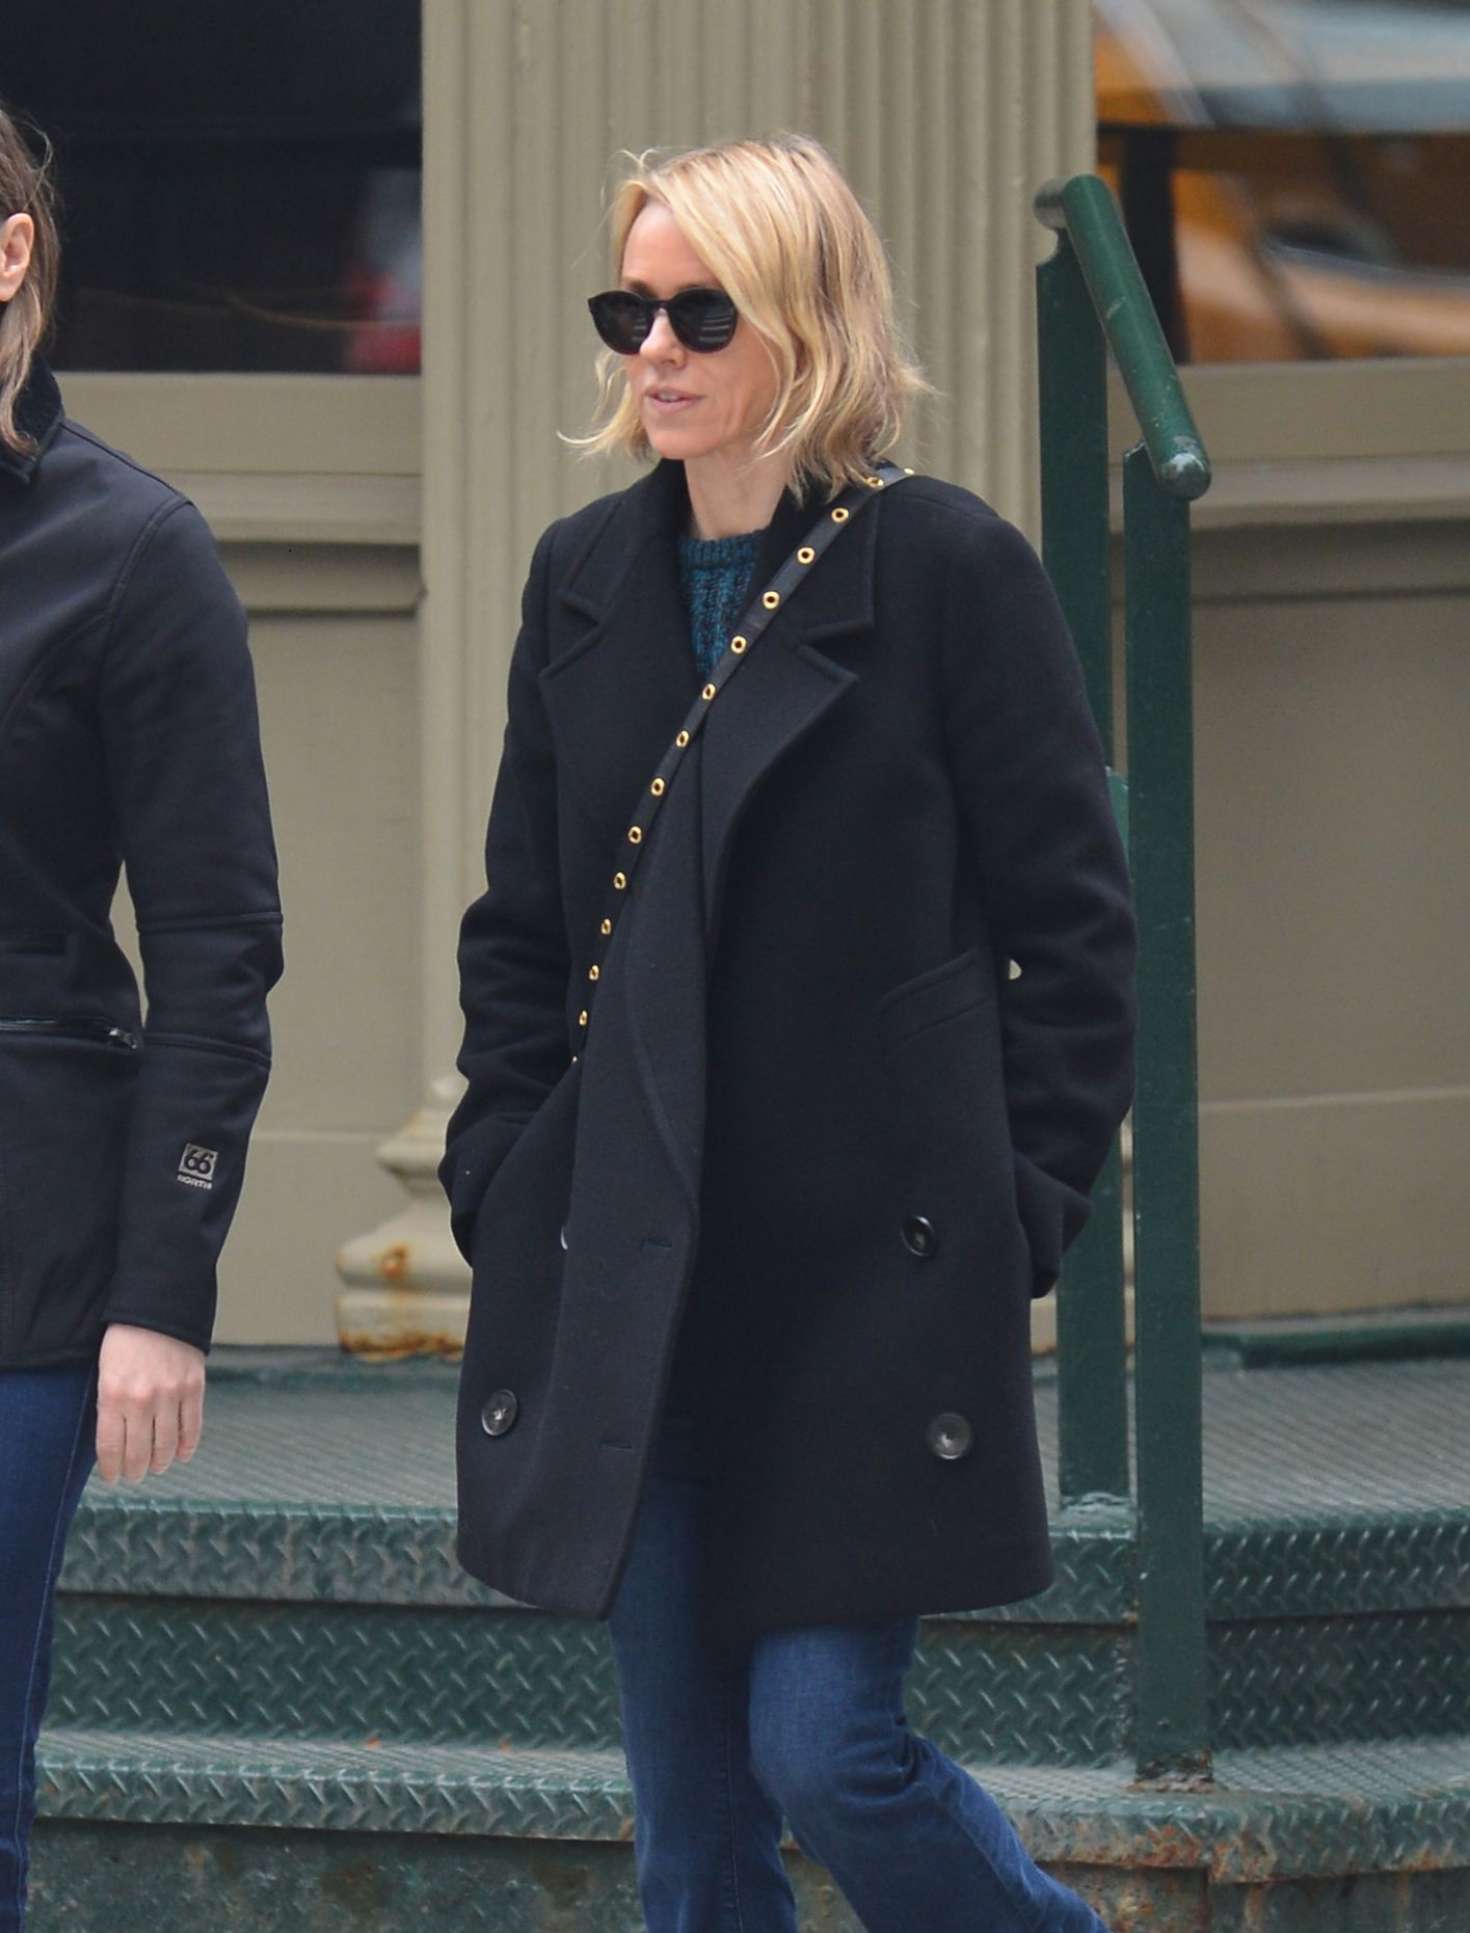 Naomi Watts out in New York